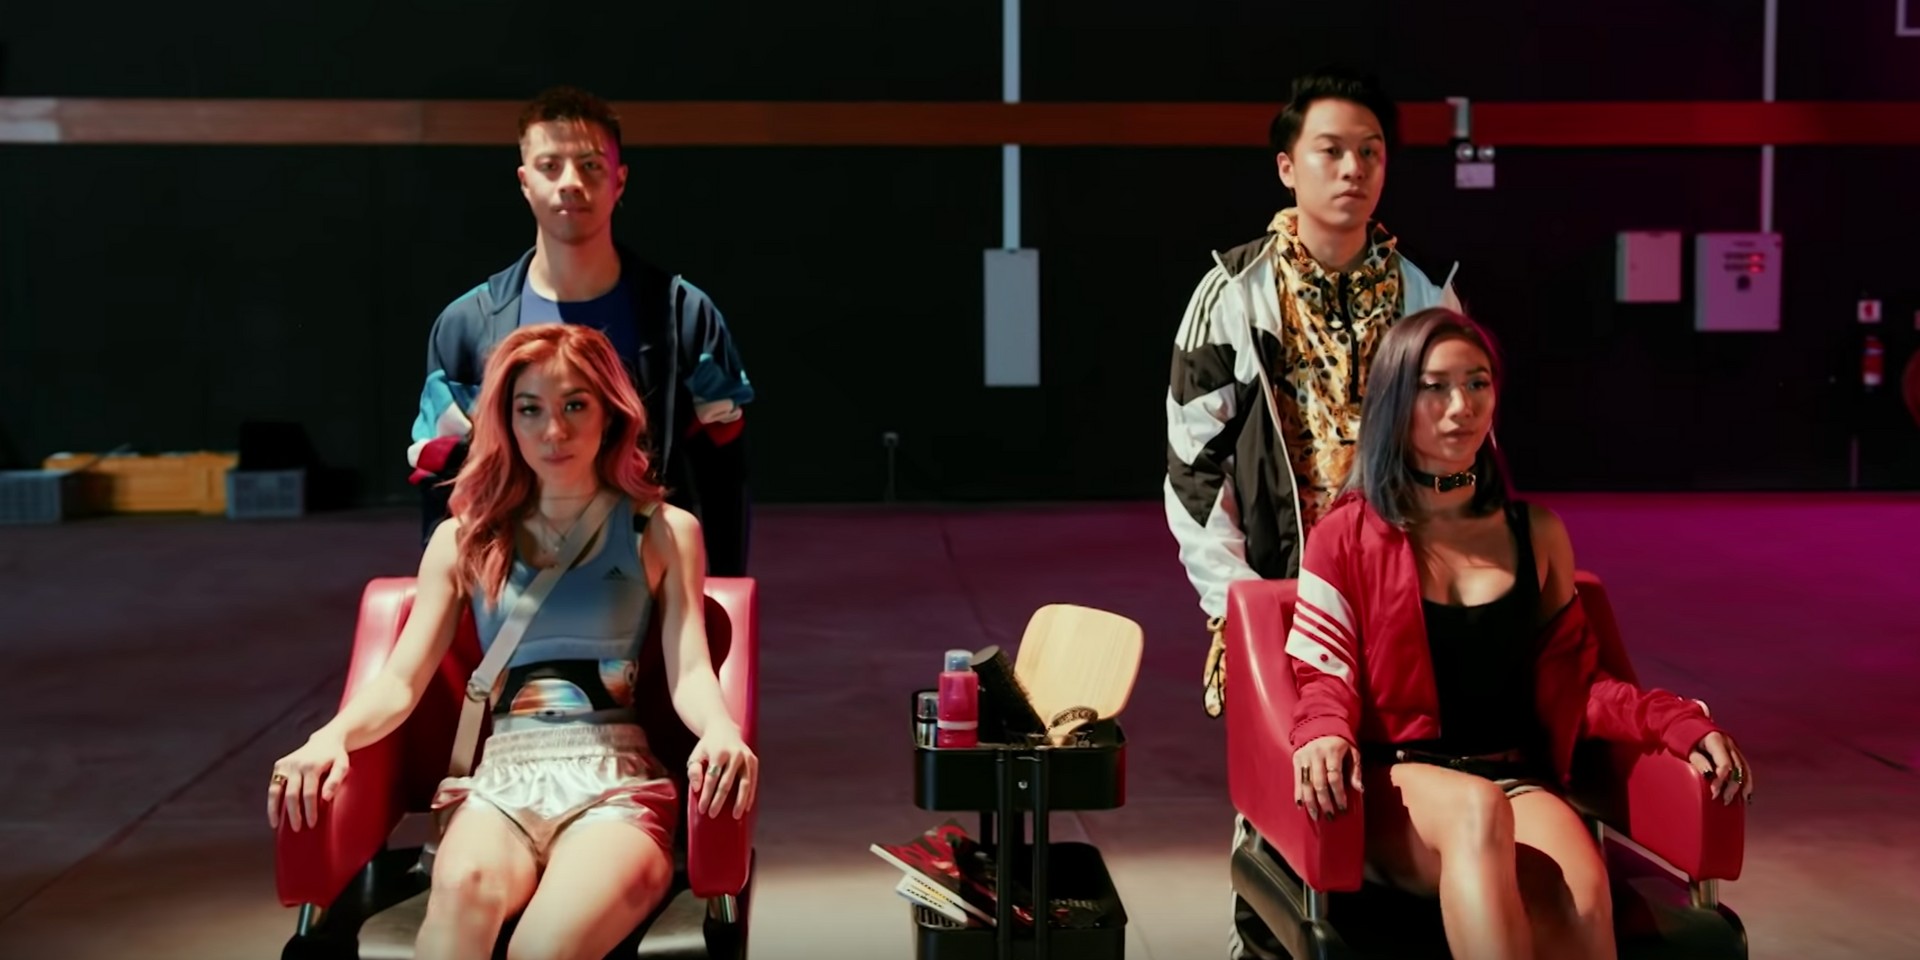 The Sam Willows release dancey music video for 'Thirsty' – watch 